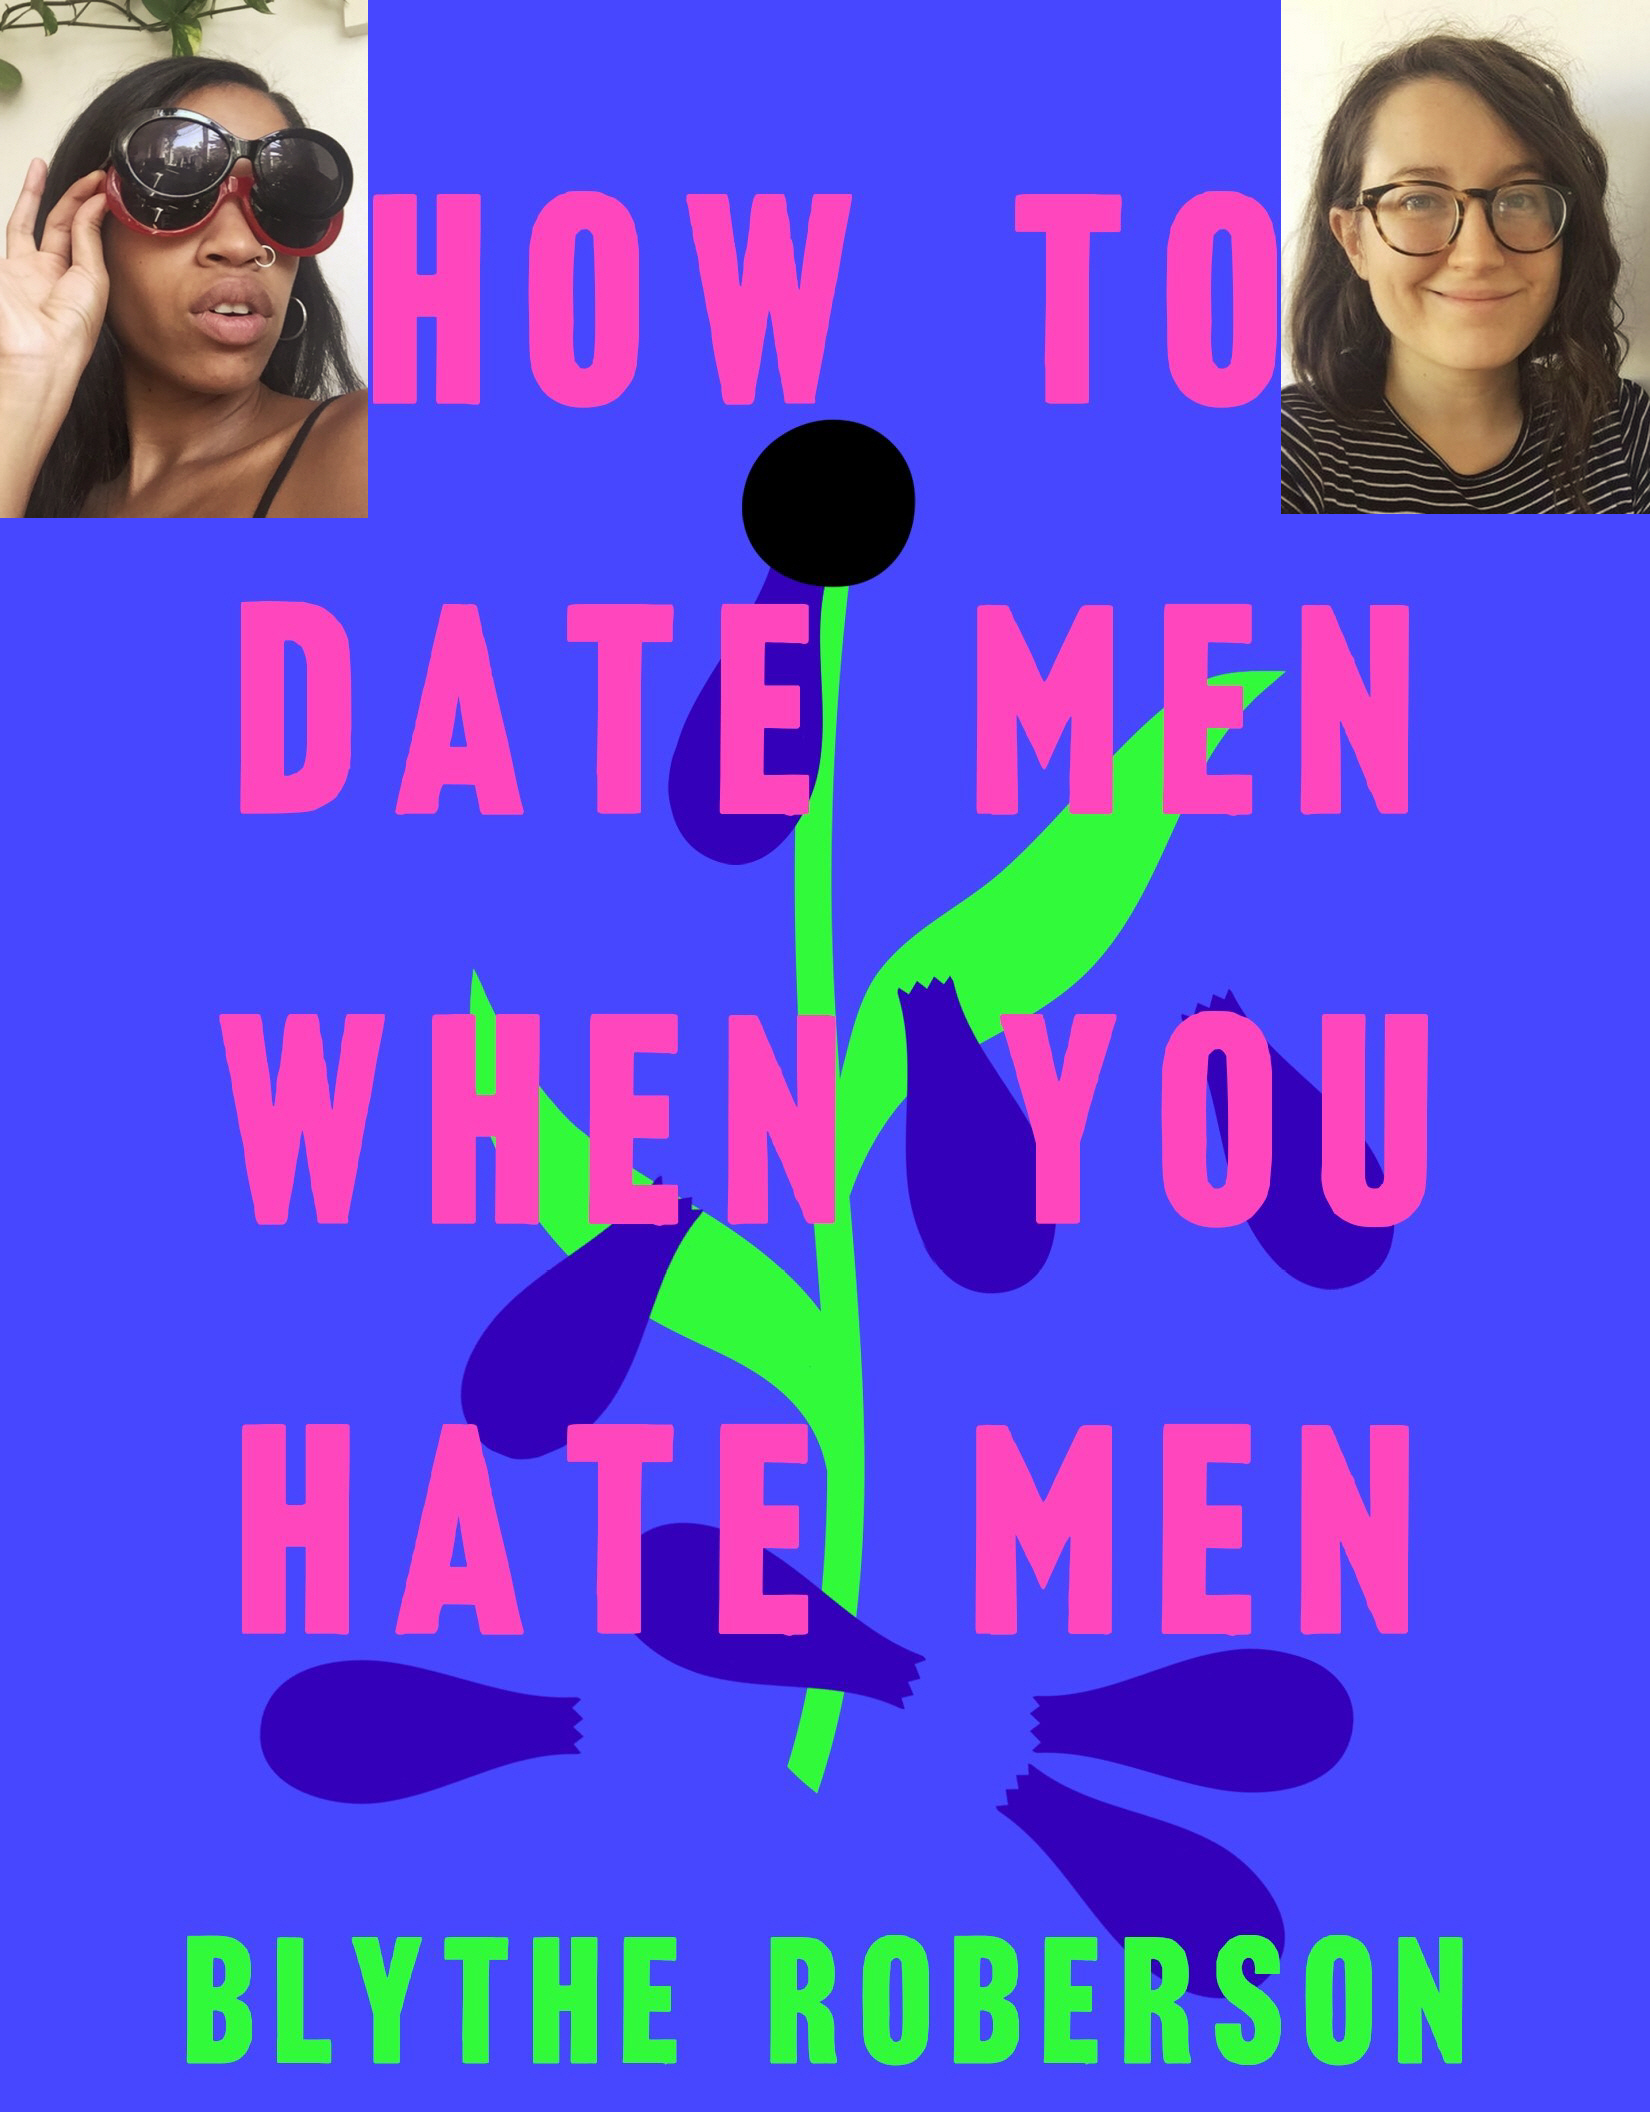 Taylor Garron amd Blythe Roberson: "How to Date Men When You Hate Men"